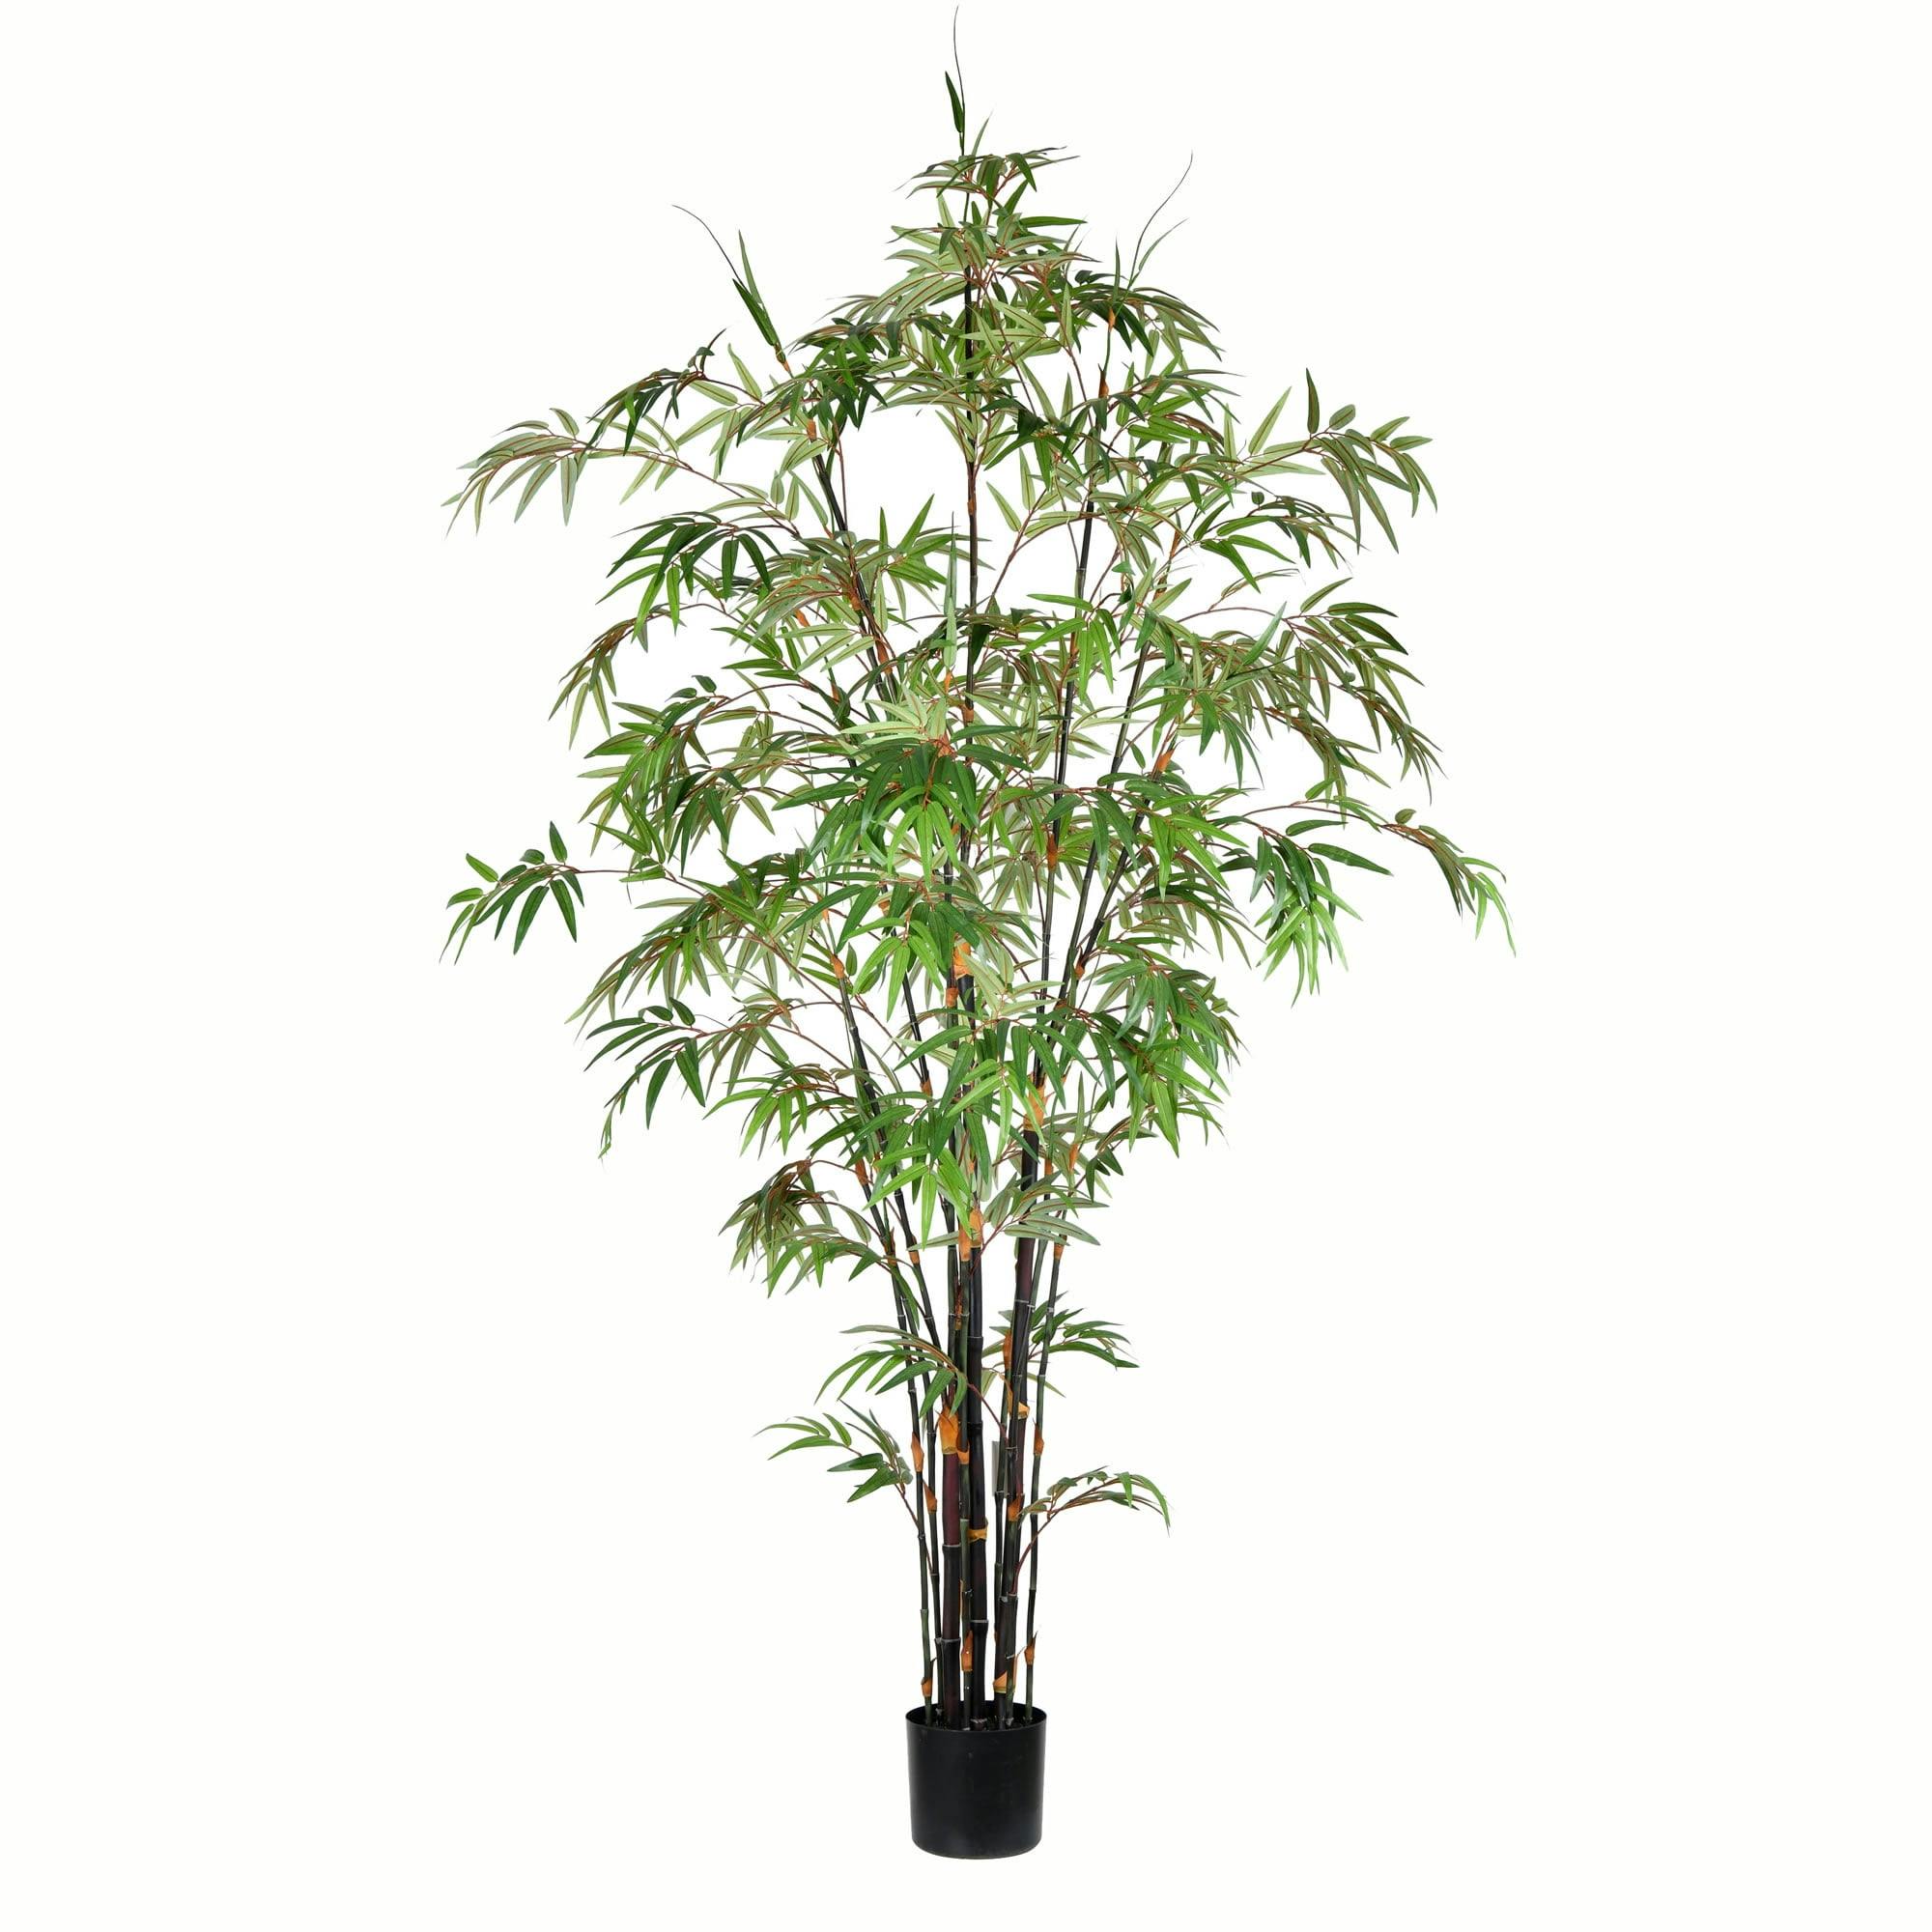 Majestic 7' Potted Black Japanese Bamboo Floor Plant